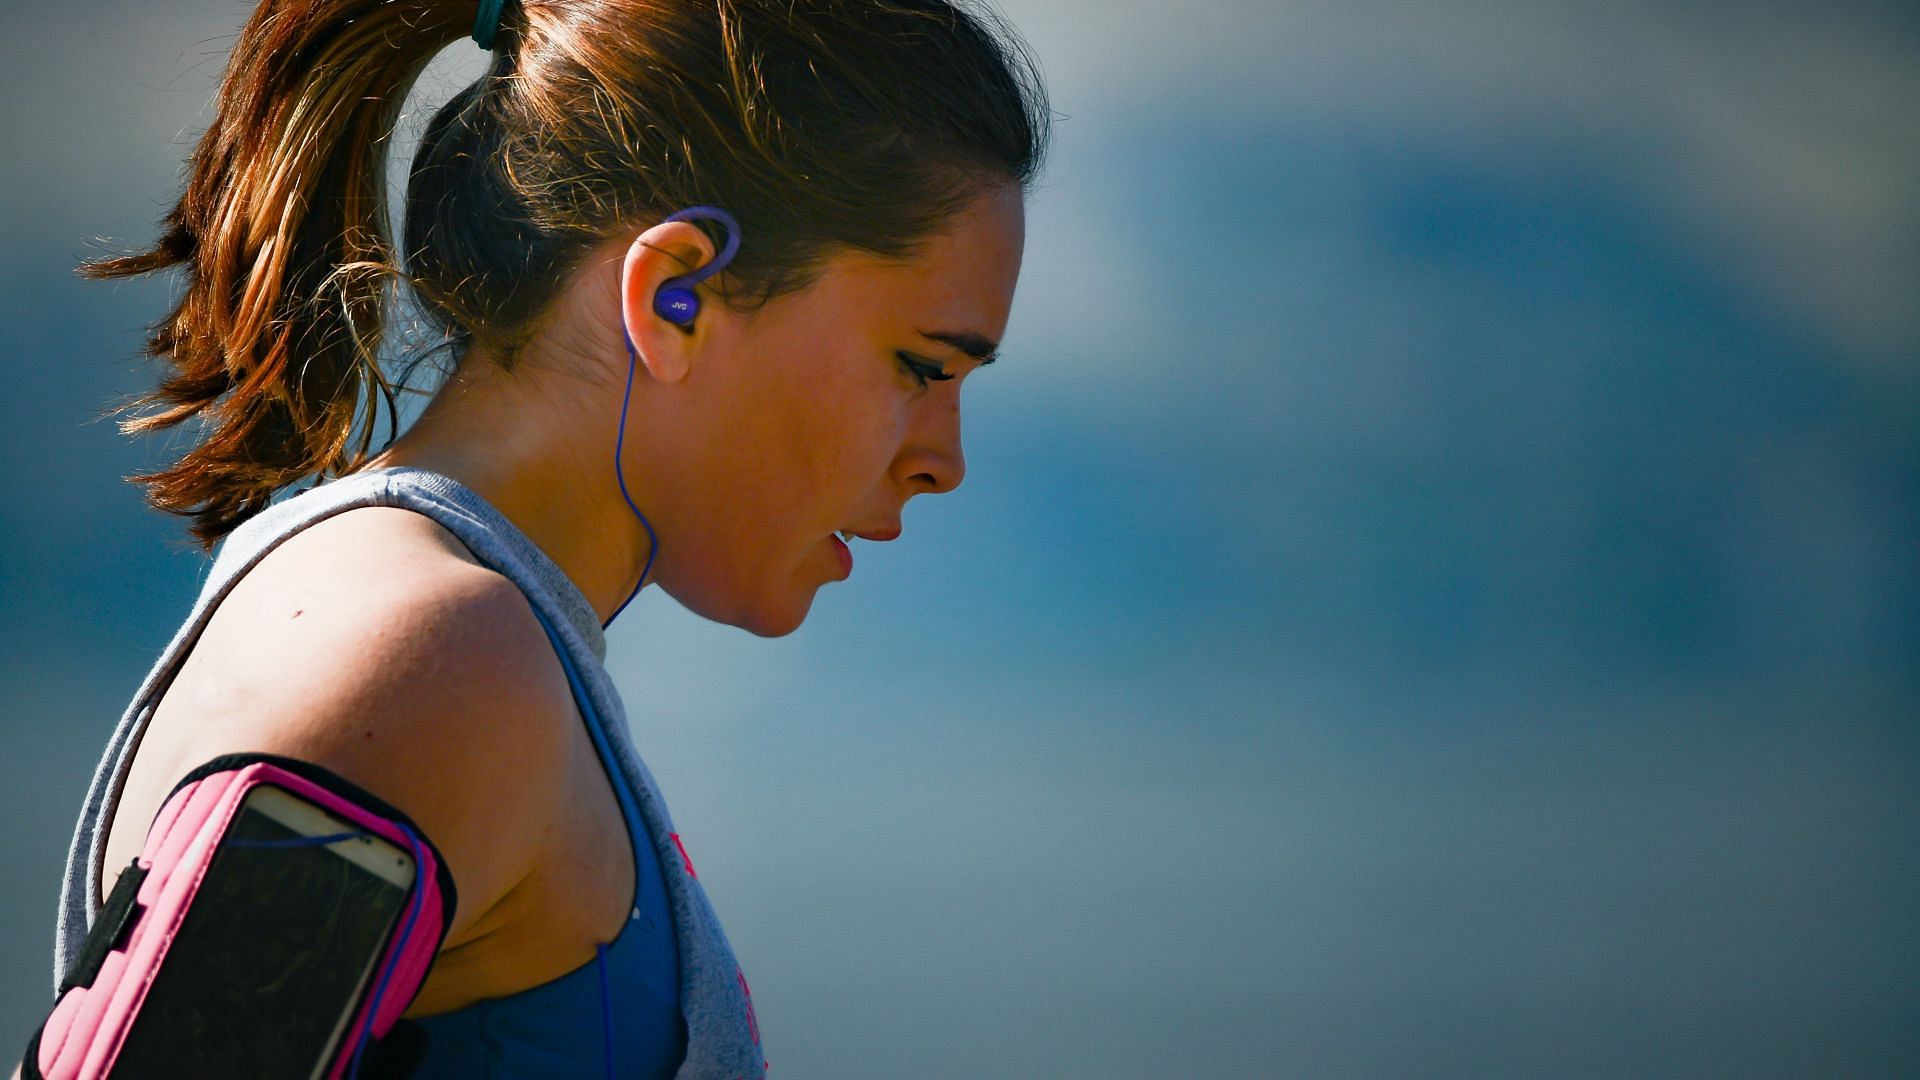 5 Mind-Blowing Ways Exercise Can Change Your Life